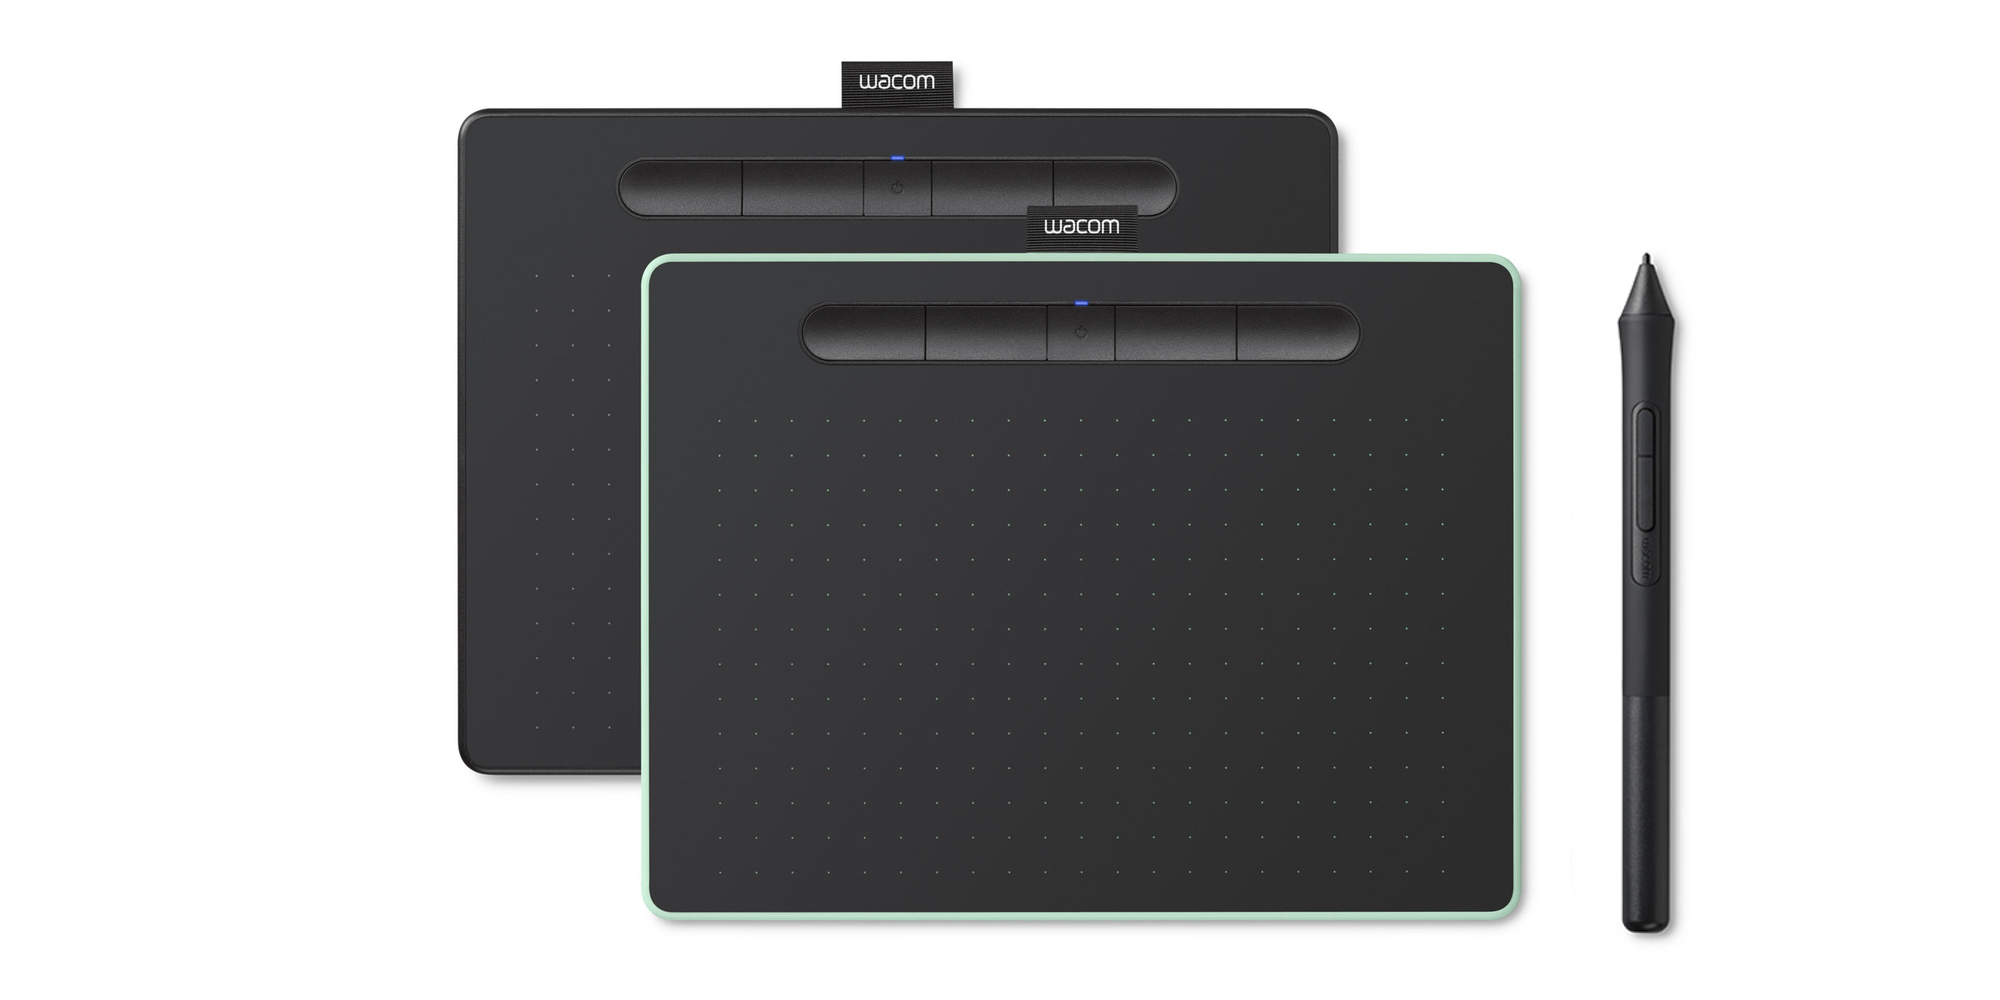 Wacom's Intuos Drawing Tablet is down to lowest price in months at $65